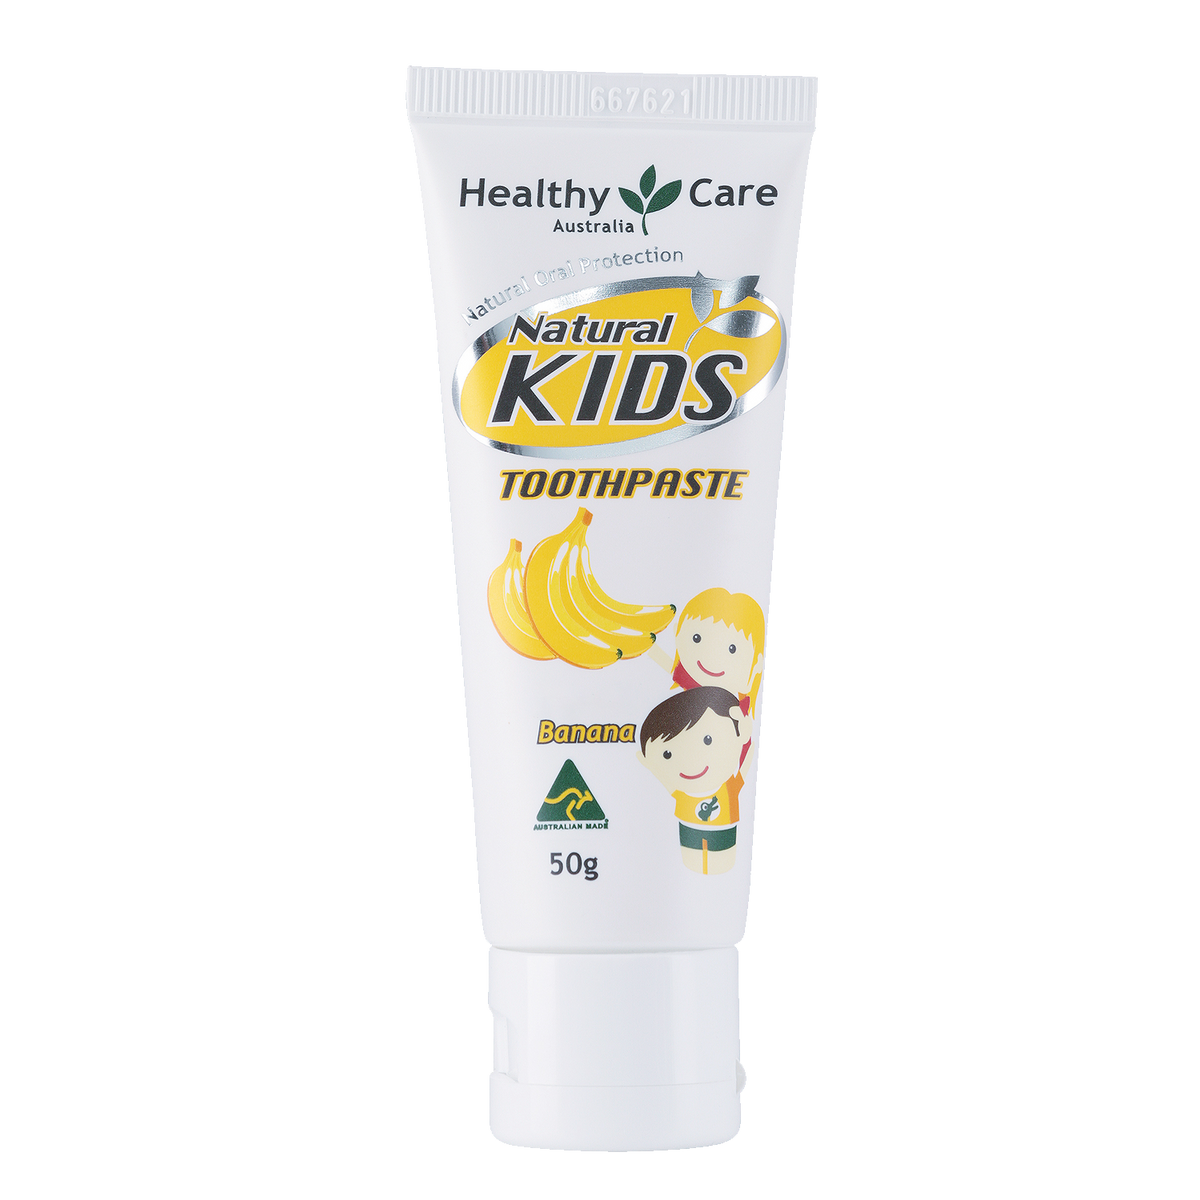 Natural Kids Toothpaste Banana Flavour 50g-Toothpaste-Healthy Care Australia